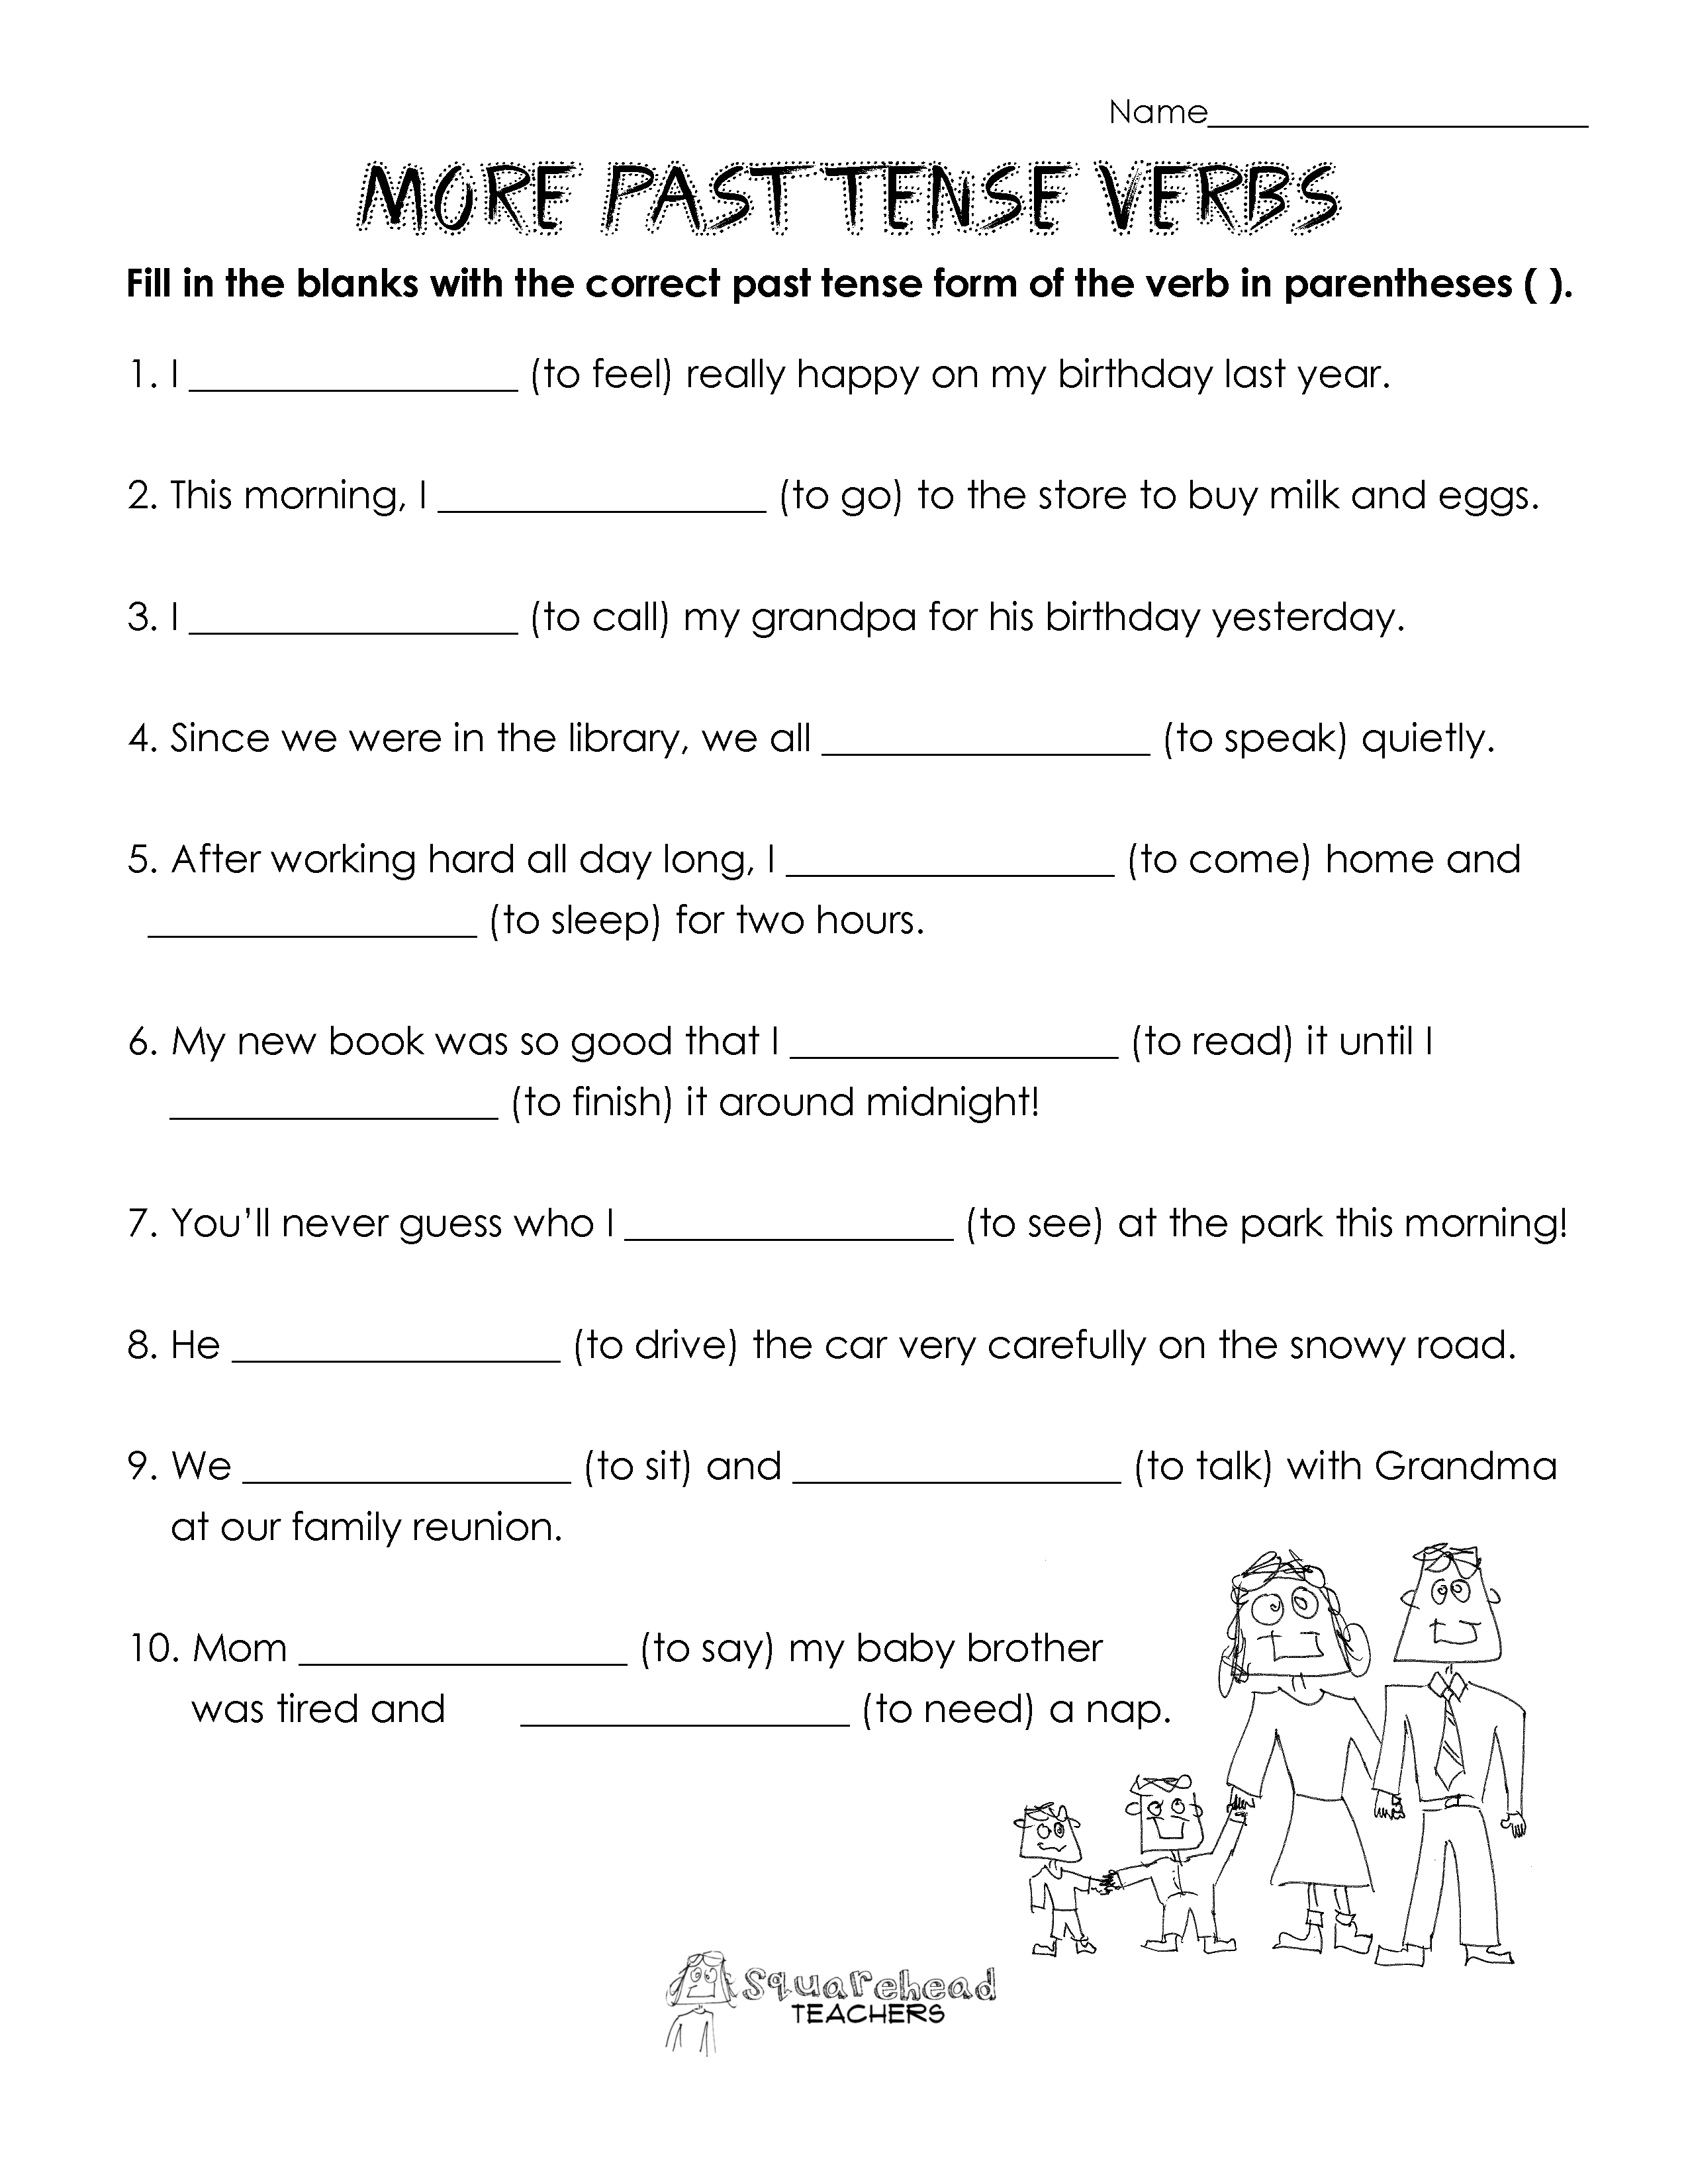 19 Best Images of Past Tense Verbs Worksheets 2nd Grade Cutting - Past ...